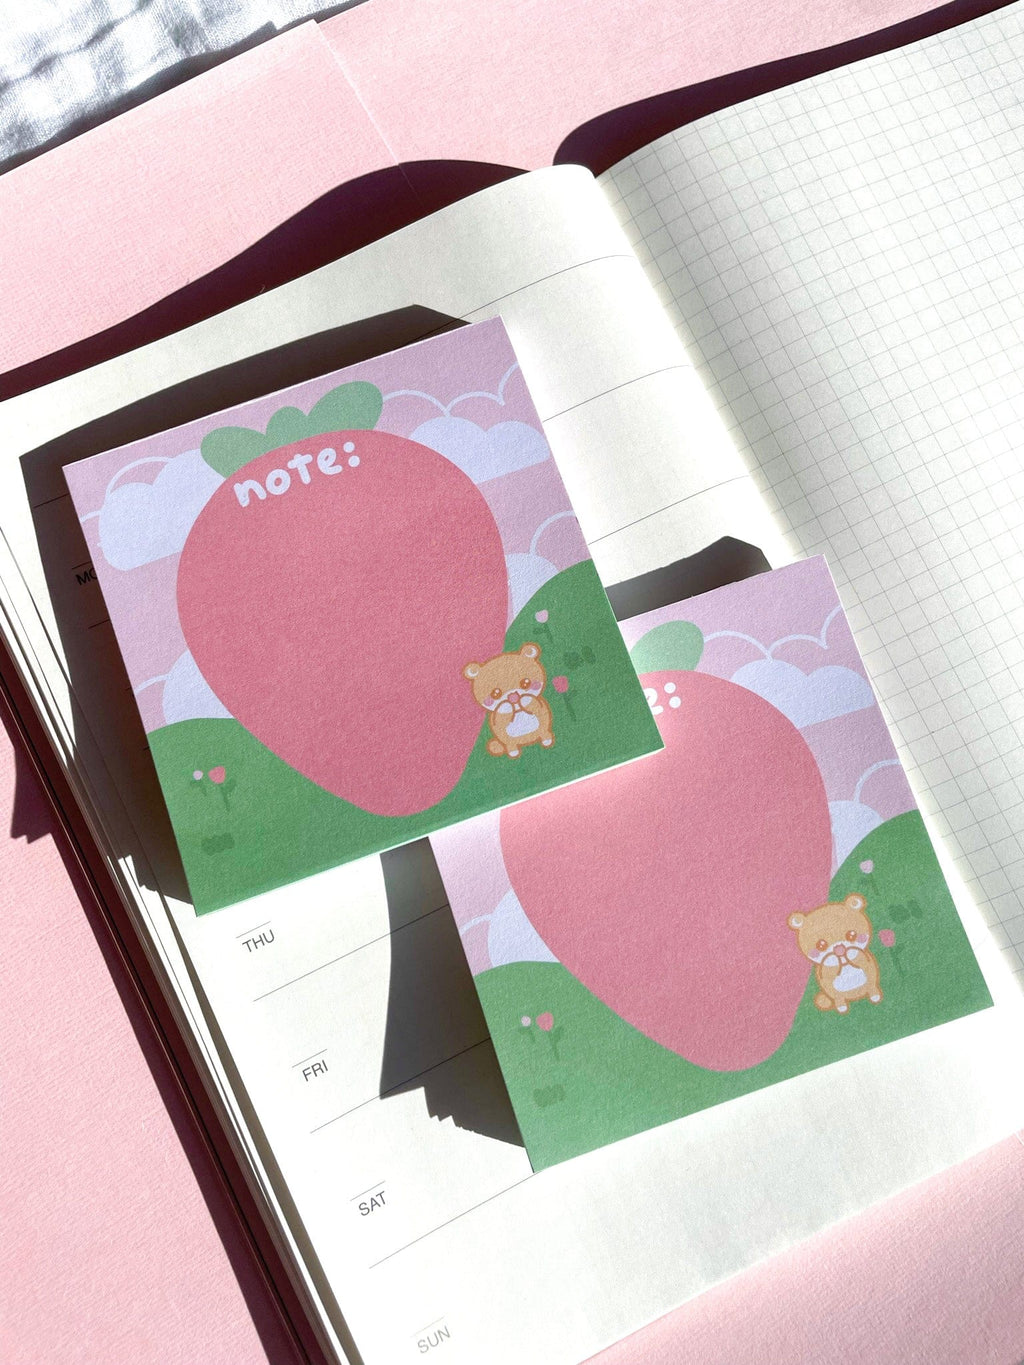 Pin by Capuccino☕️ on Post it  Memo pad design, Kawaii stationery, Memo  paper